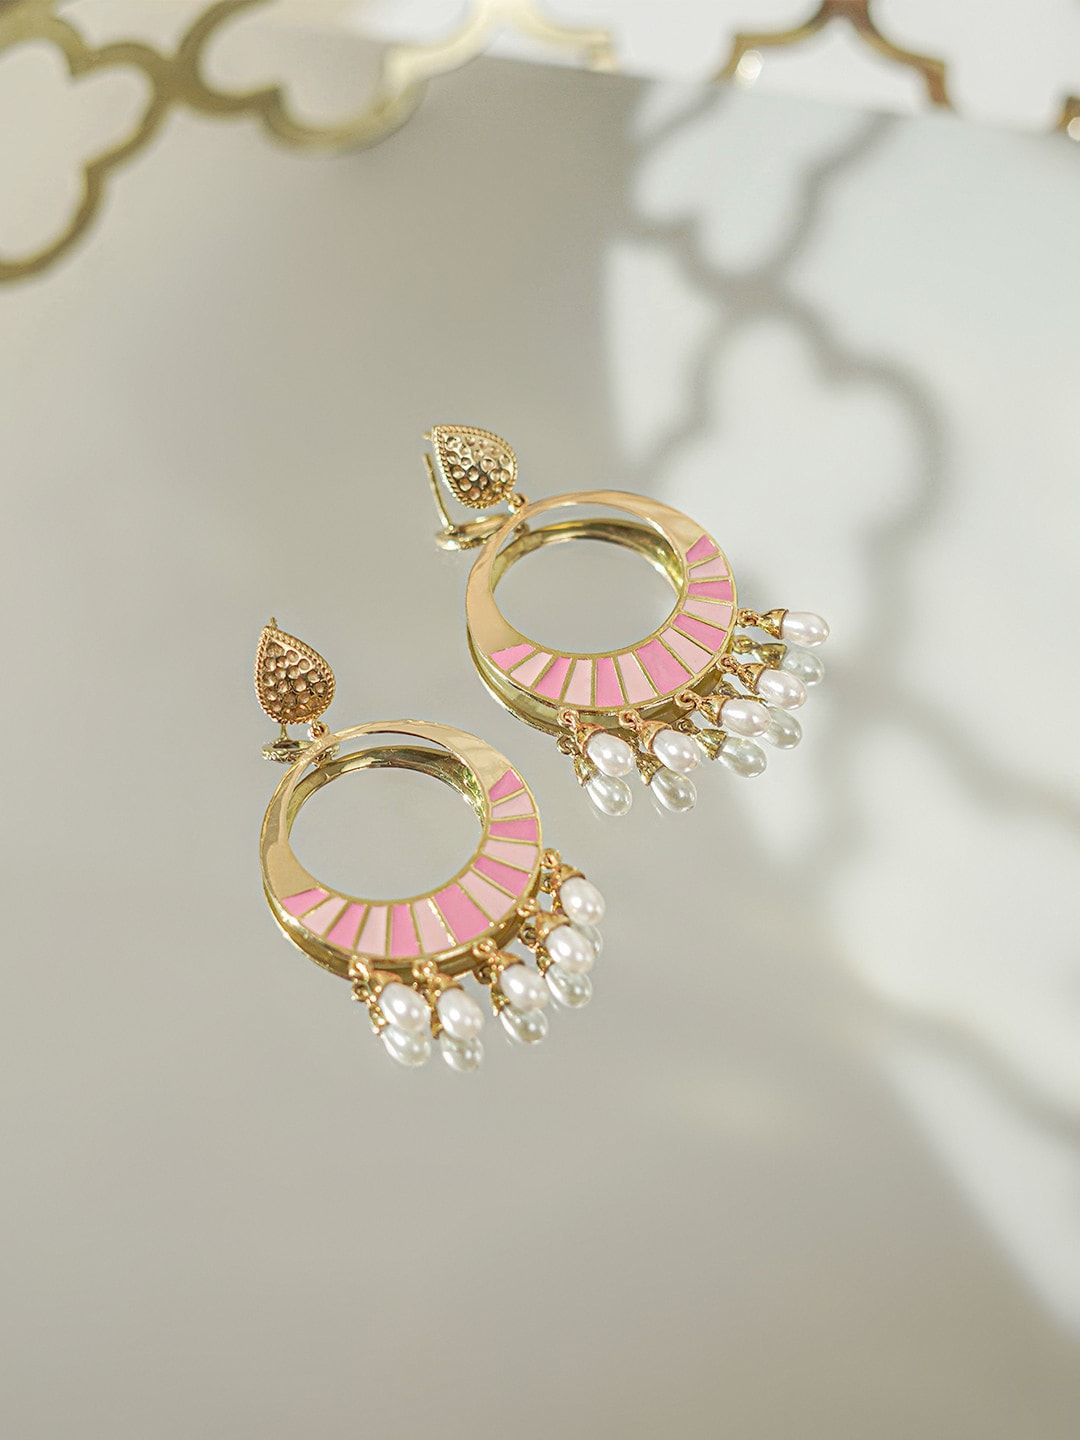 Mikoto by FableStreet Gold-Toned & Peach-Coloured Crescent Shaped Chandbalis Earrings Price in India